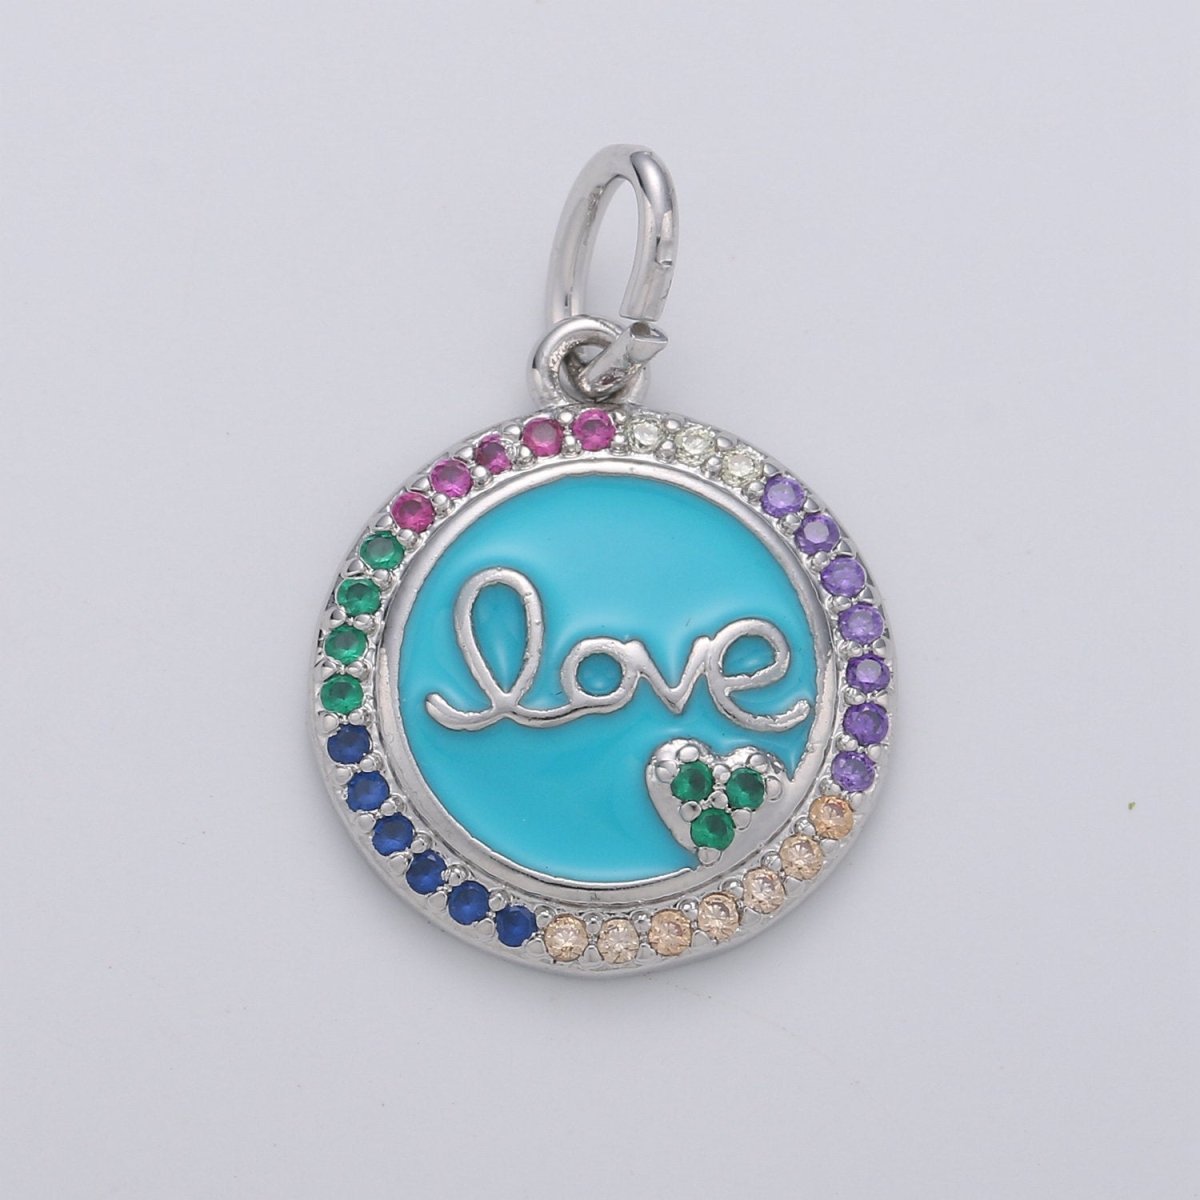 Dainty Blue Love Pendant Enamel Round Disc Charm, Gold Micro Pave Love Charm Jewelry for Necklace Bracelet Earring Component D-180 - DLUXCA